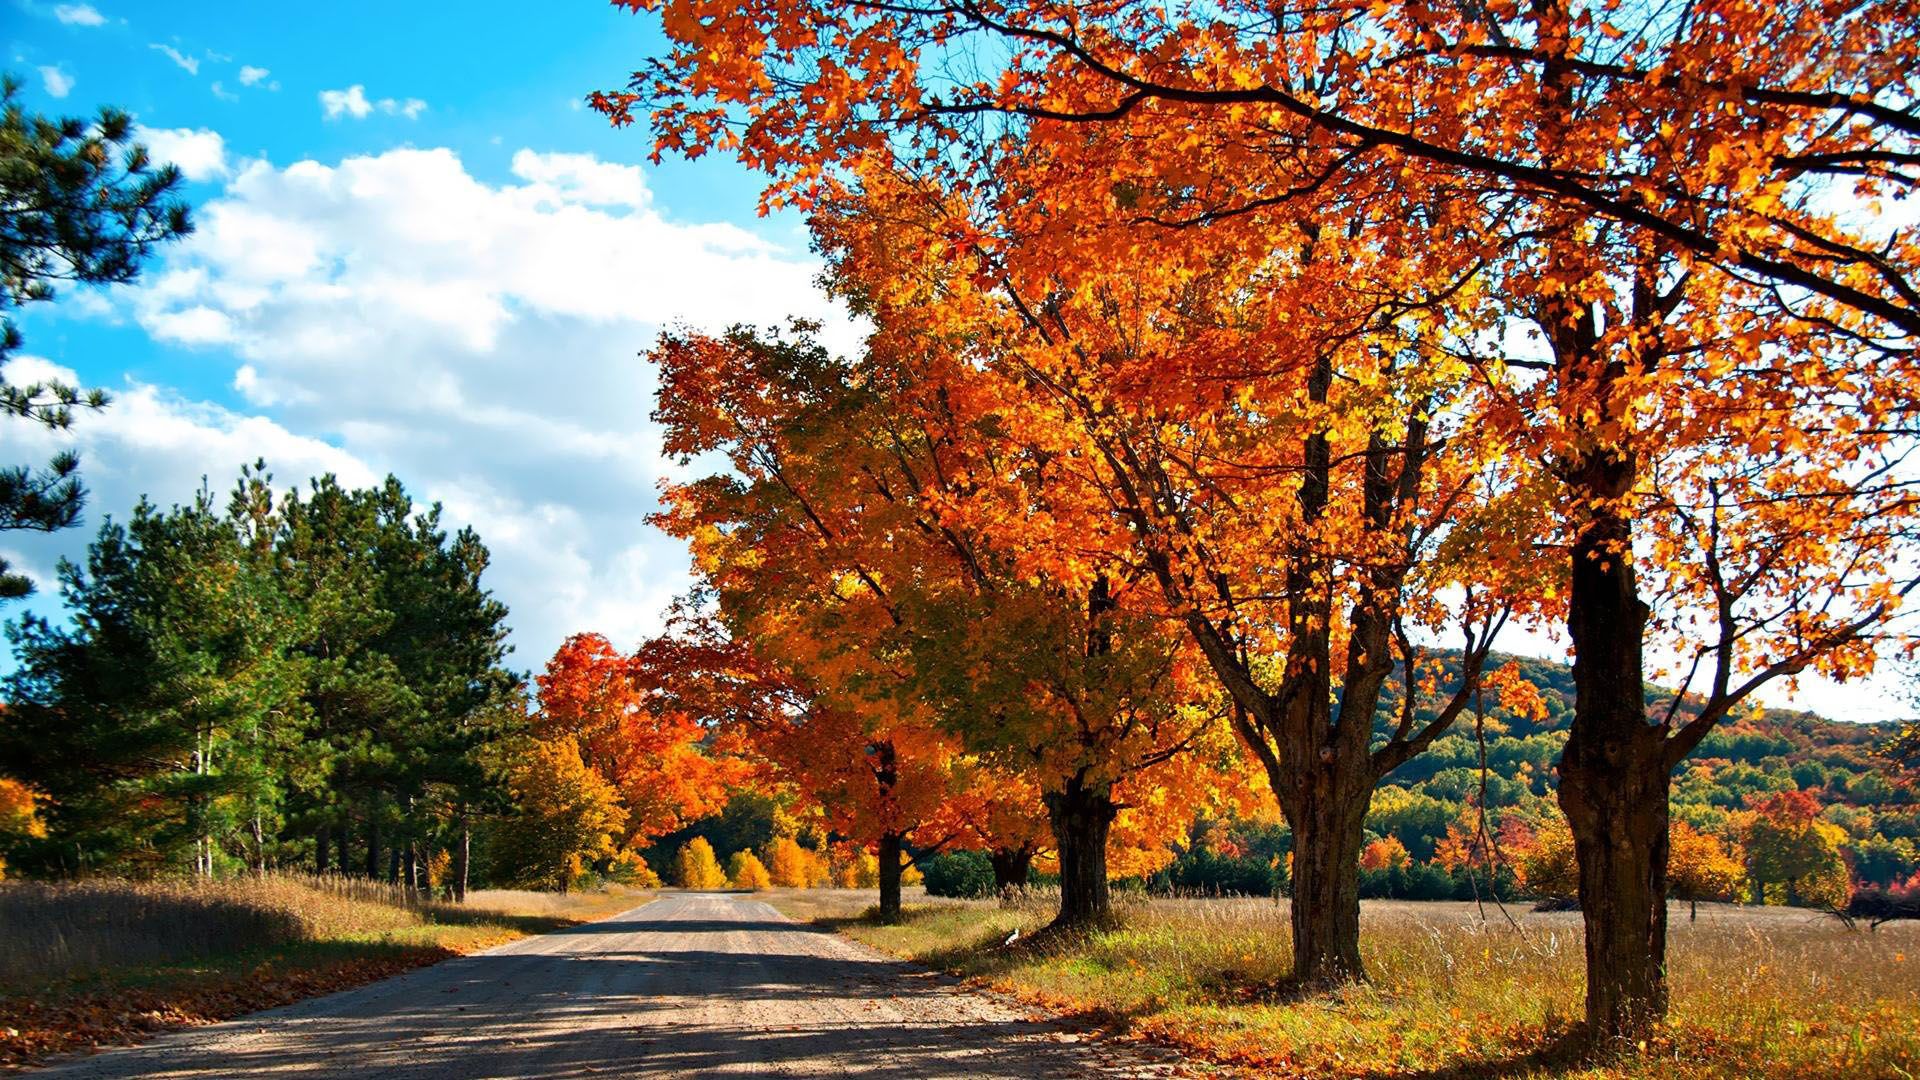 HD wallpaper, Autumn, Road, Country